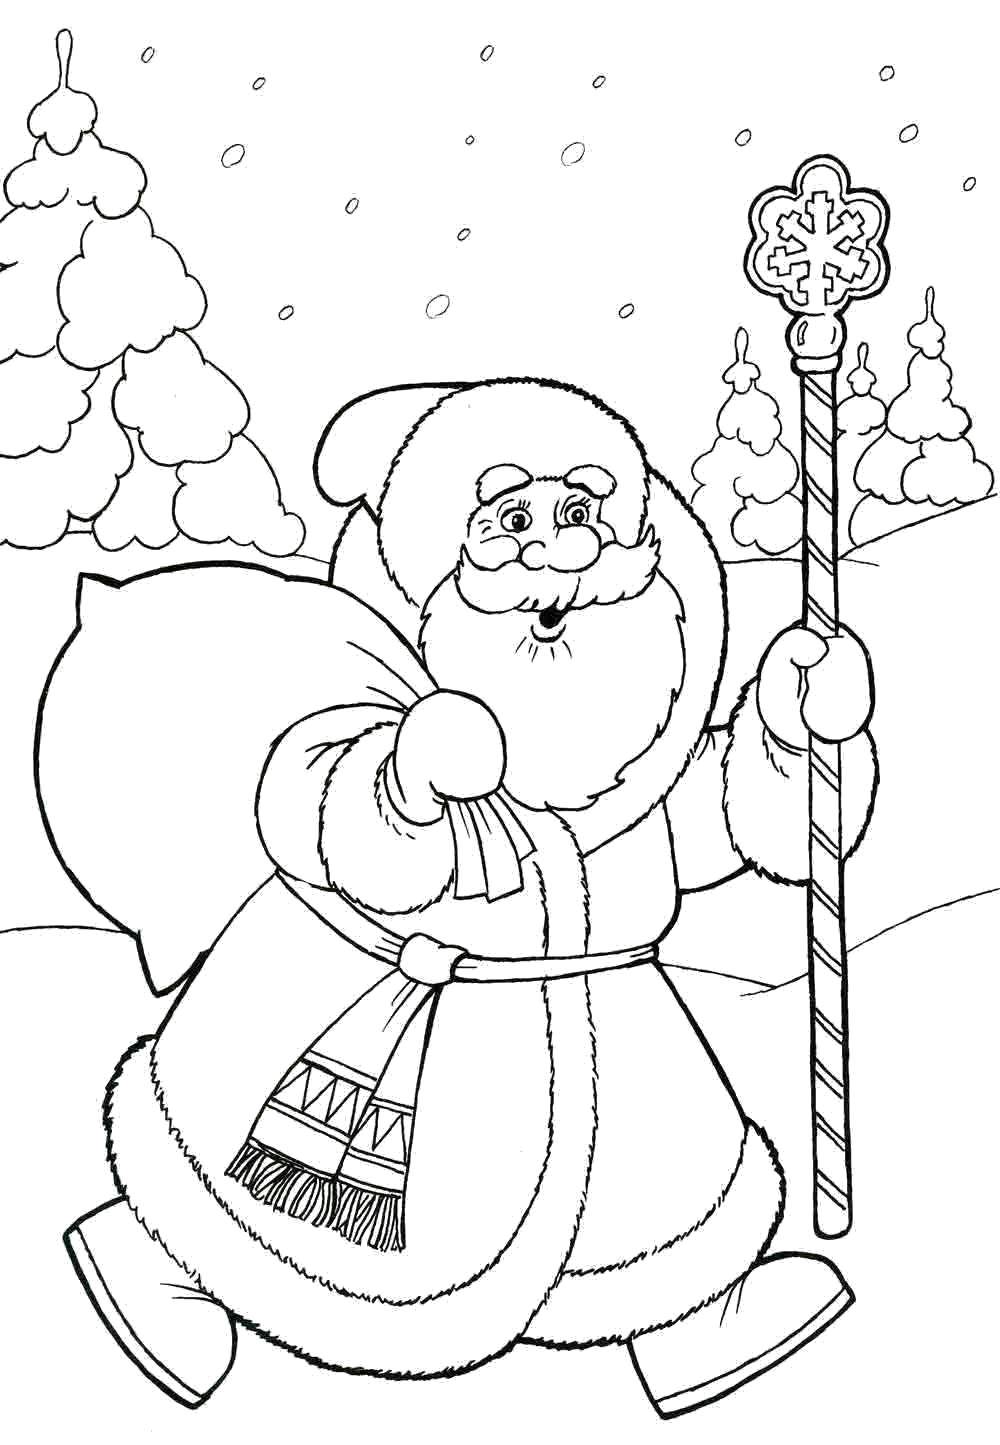 Coloring Santa Claus came to give presents. Category new year. Tags:  New Year, Santa Claus, Santa Claus, gifts.